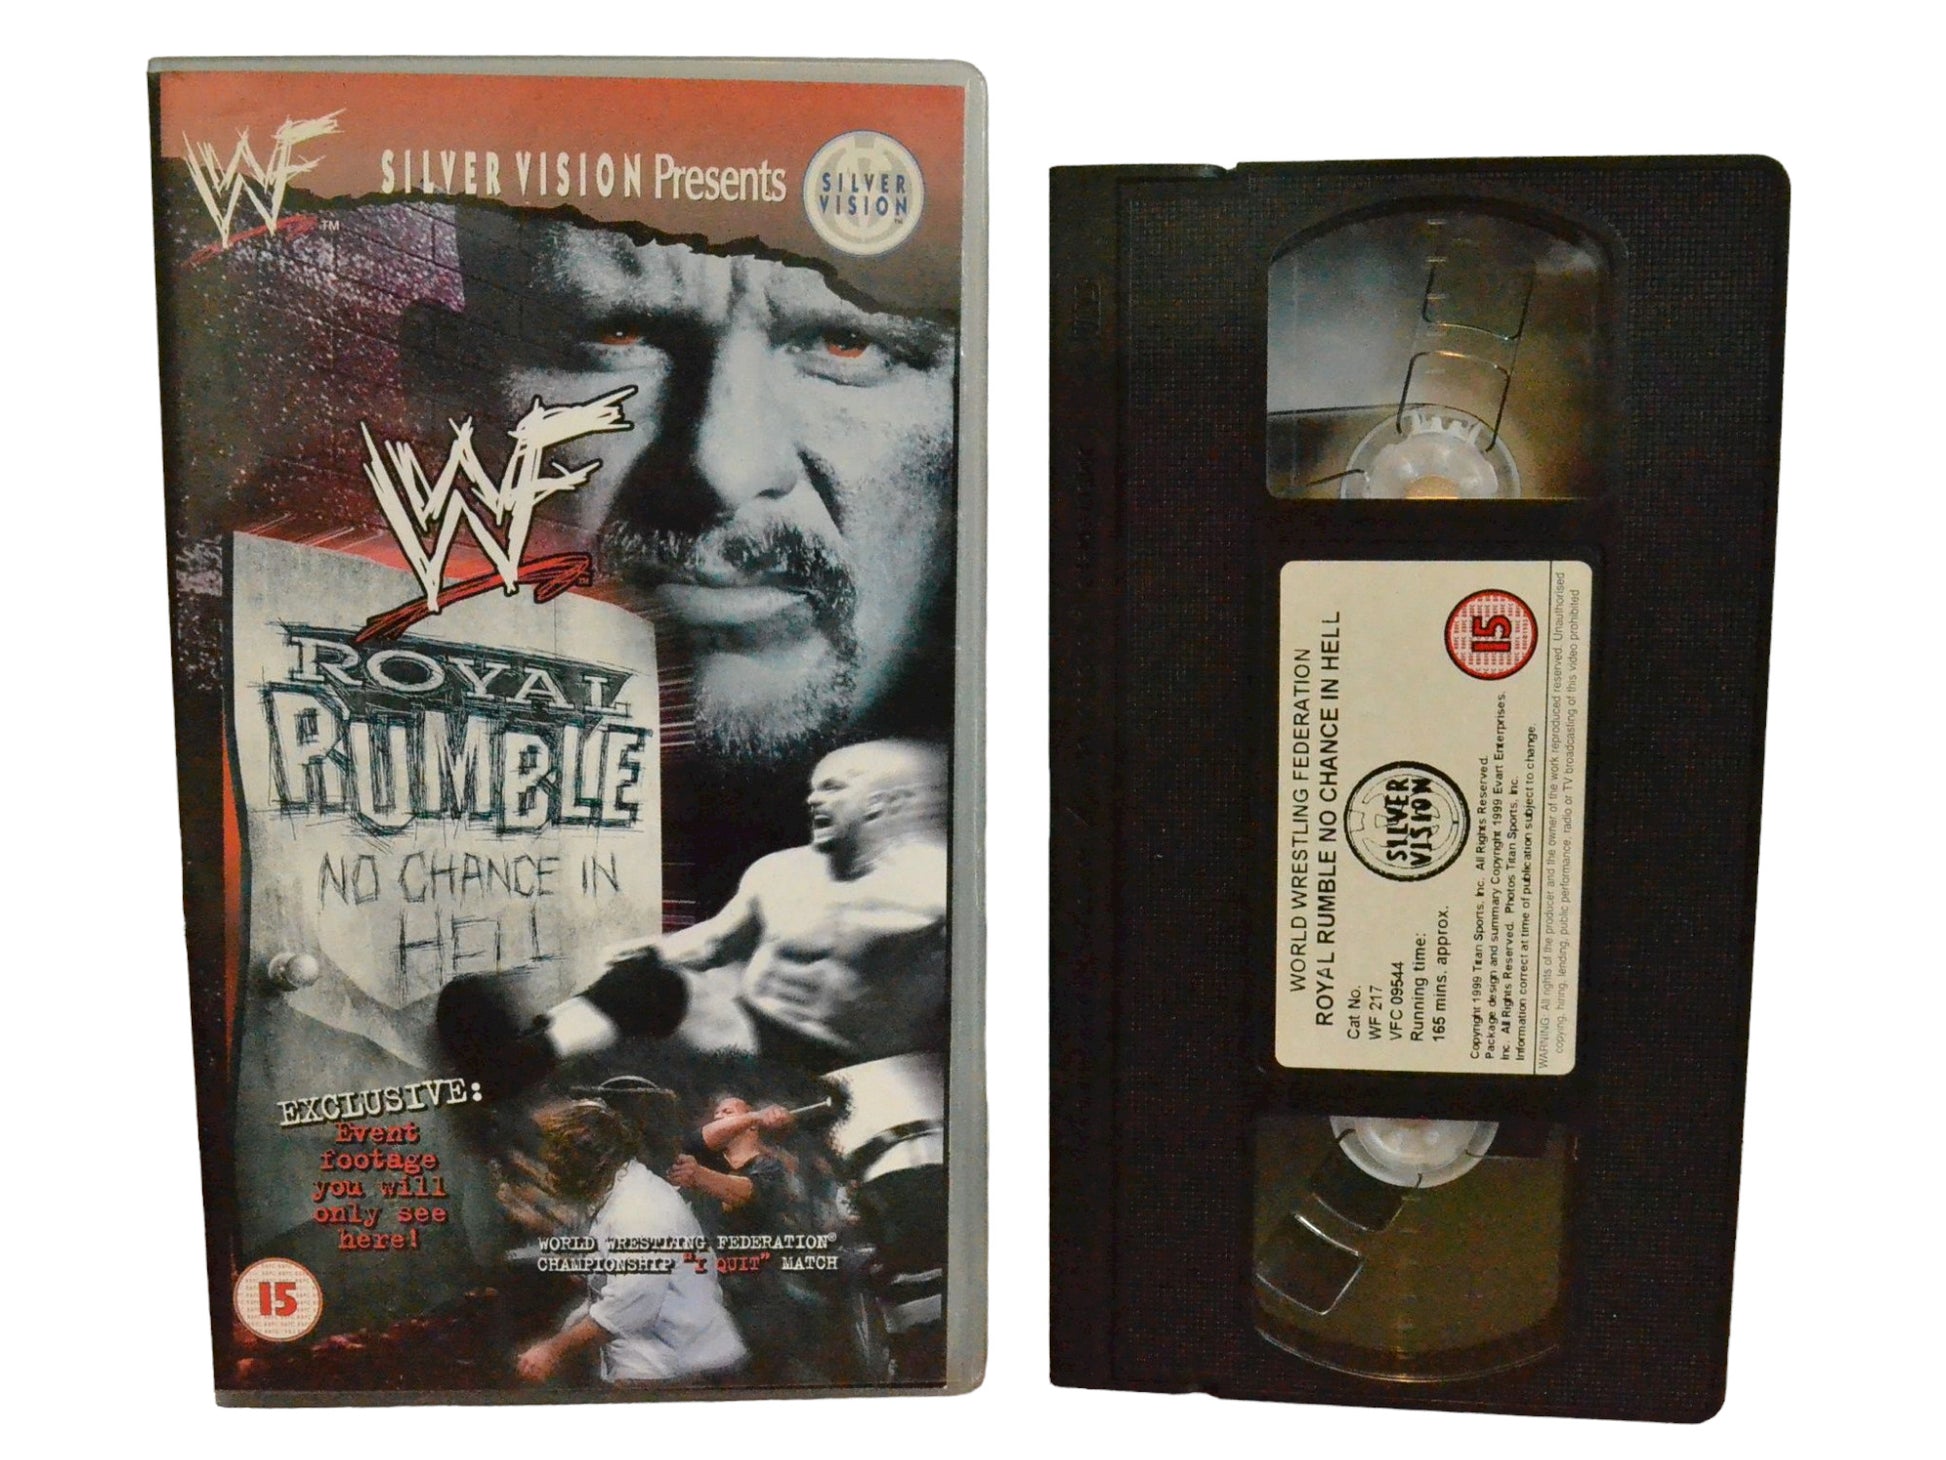 WWF: Royal Rumble No Chance In Hell - Dwayne Johnson - World Wrestling Federation Home Video - Wrestling - PAL - VHS-